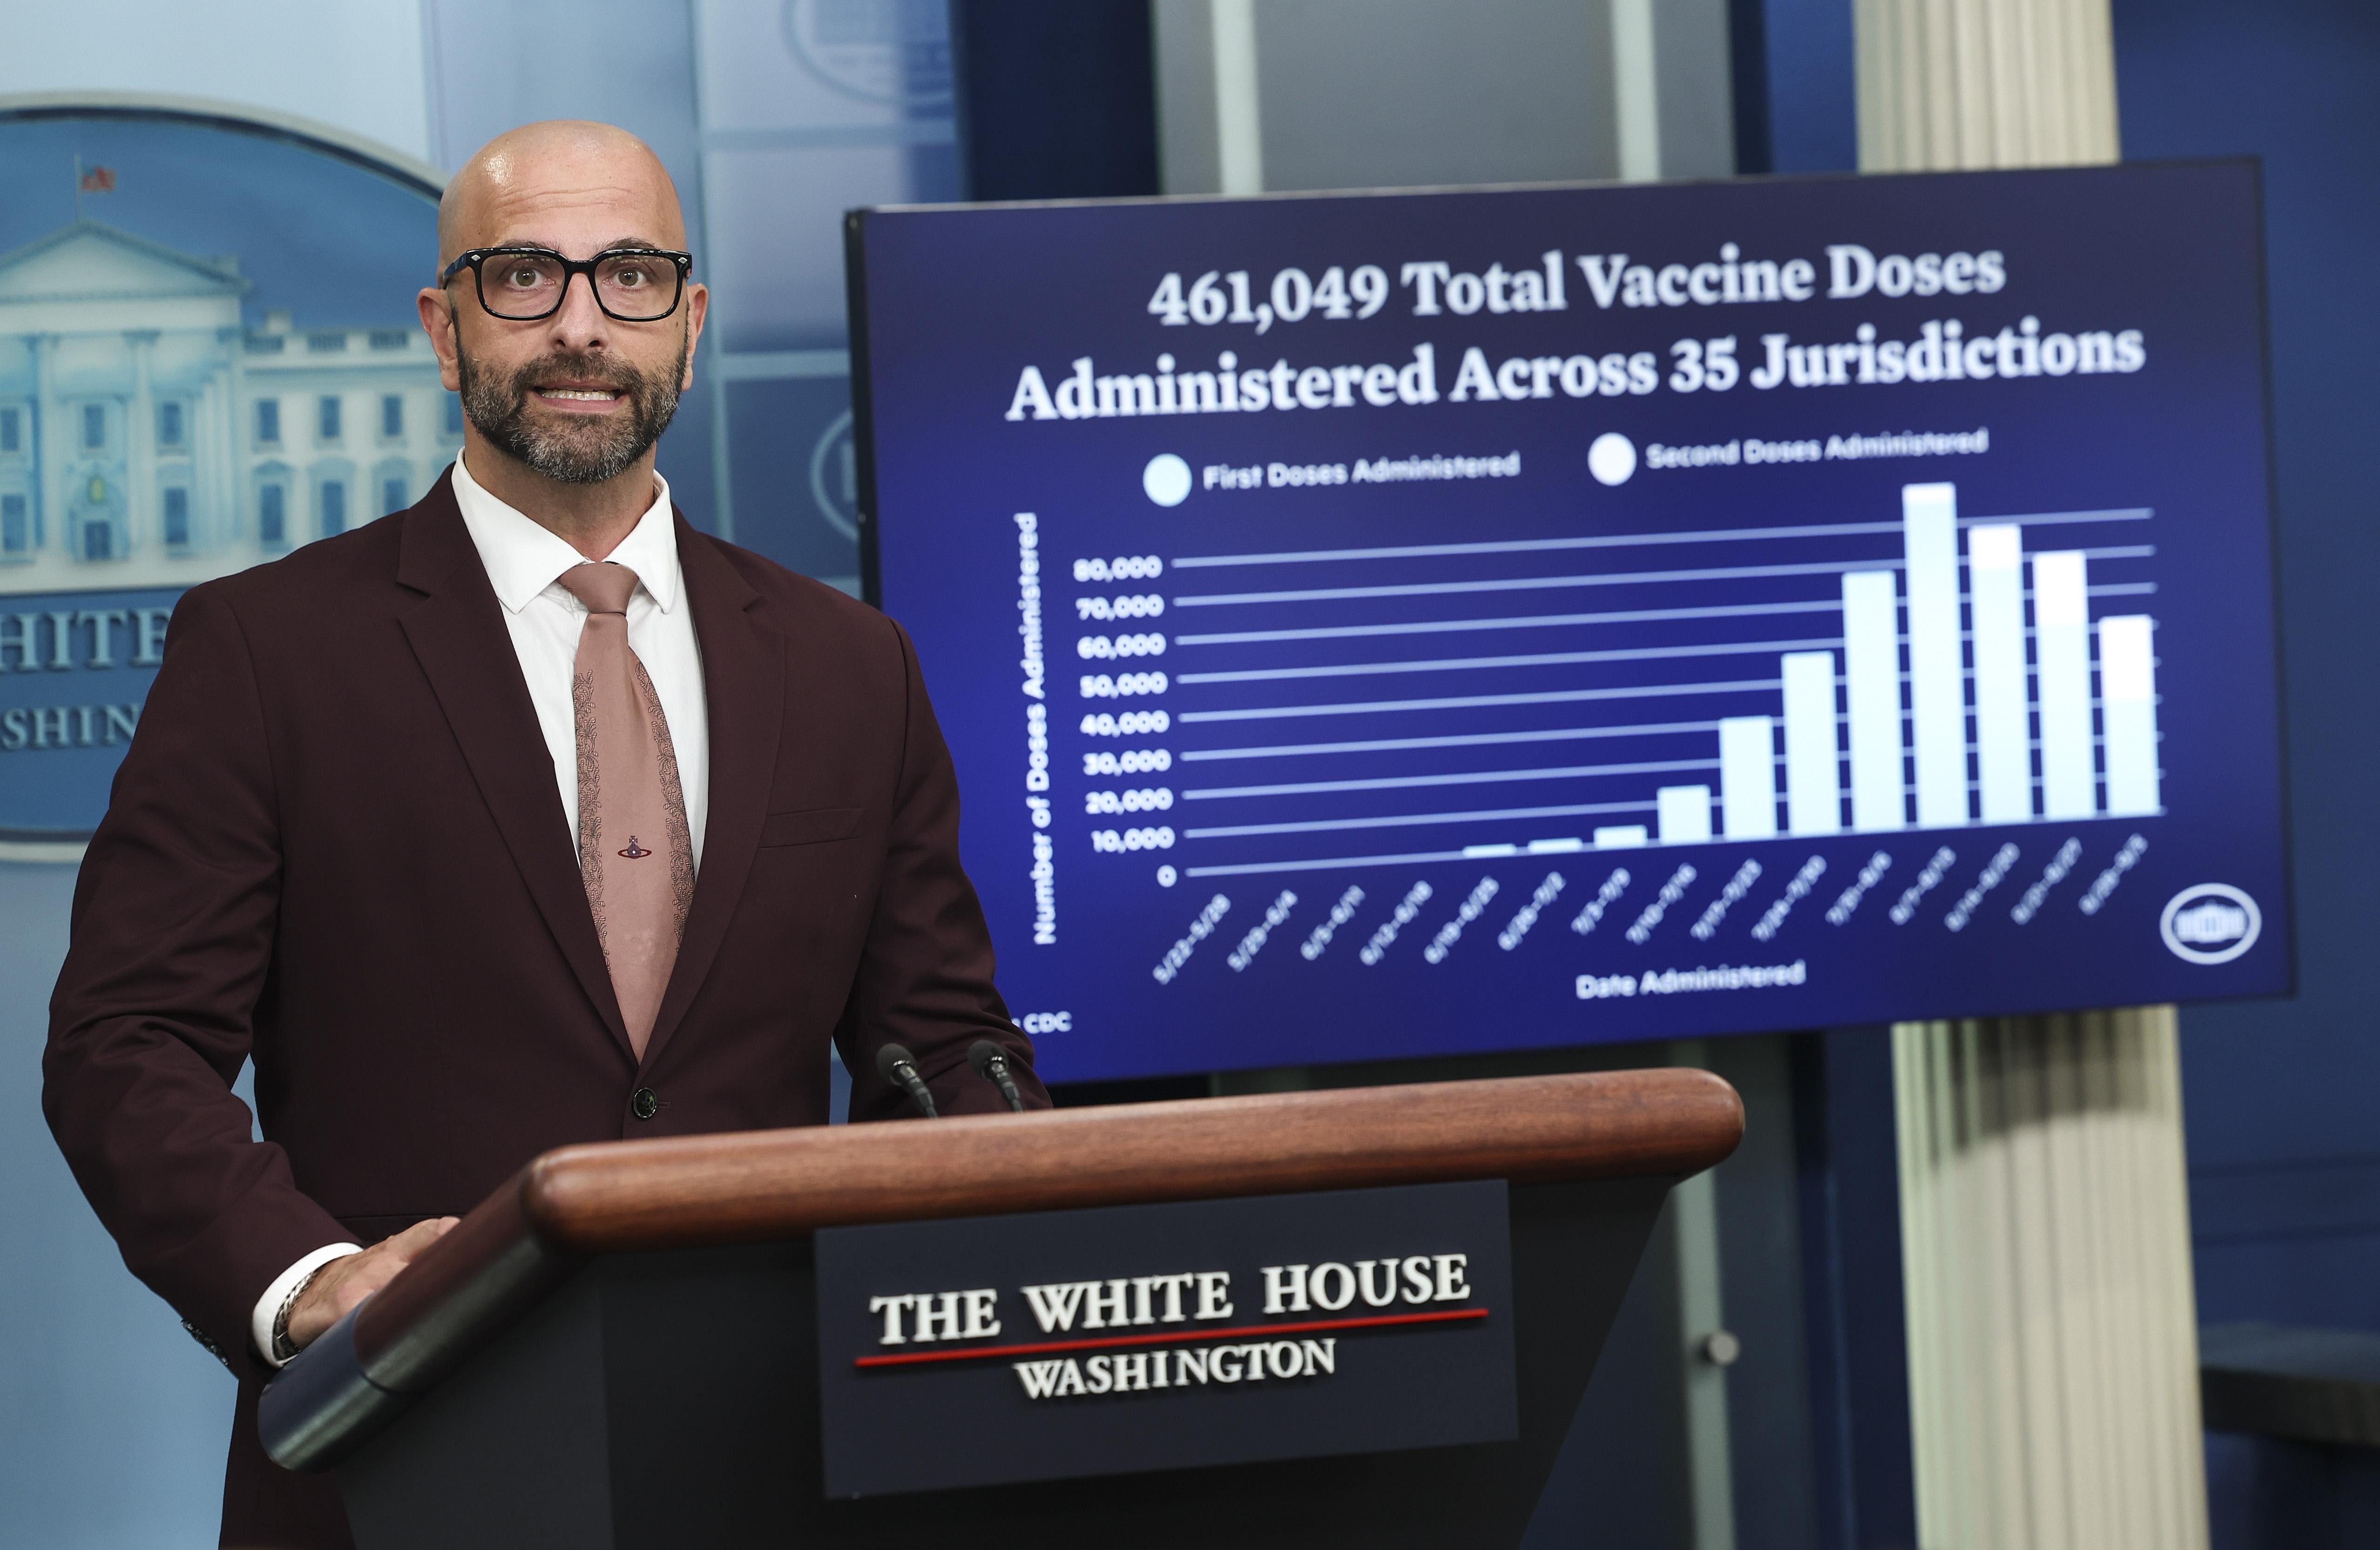 A bald man with a beard and glasses stands behind the White House press briefing room podium. There is a chart showing monkeypox vaccine dosage distribution numbers behind him. 